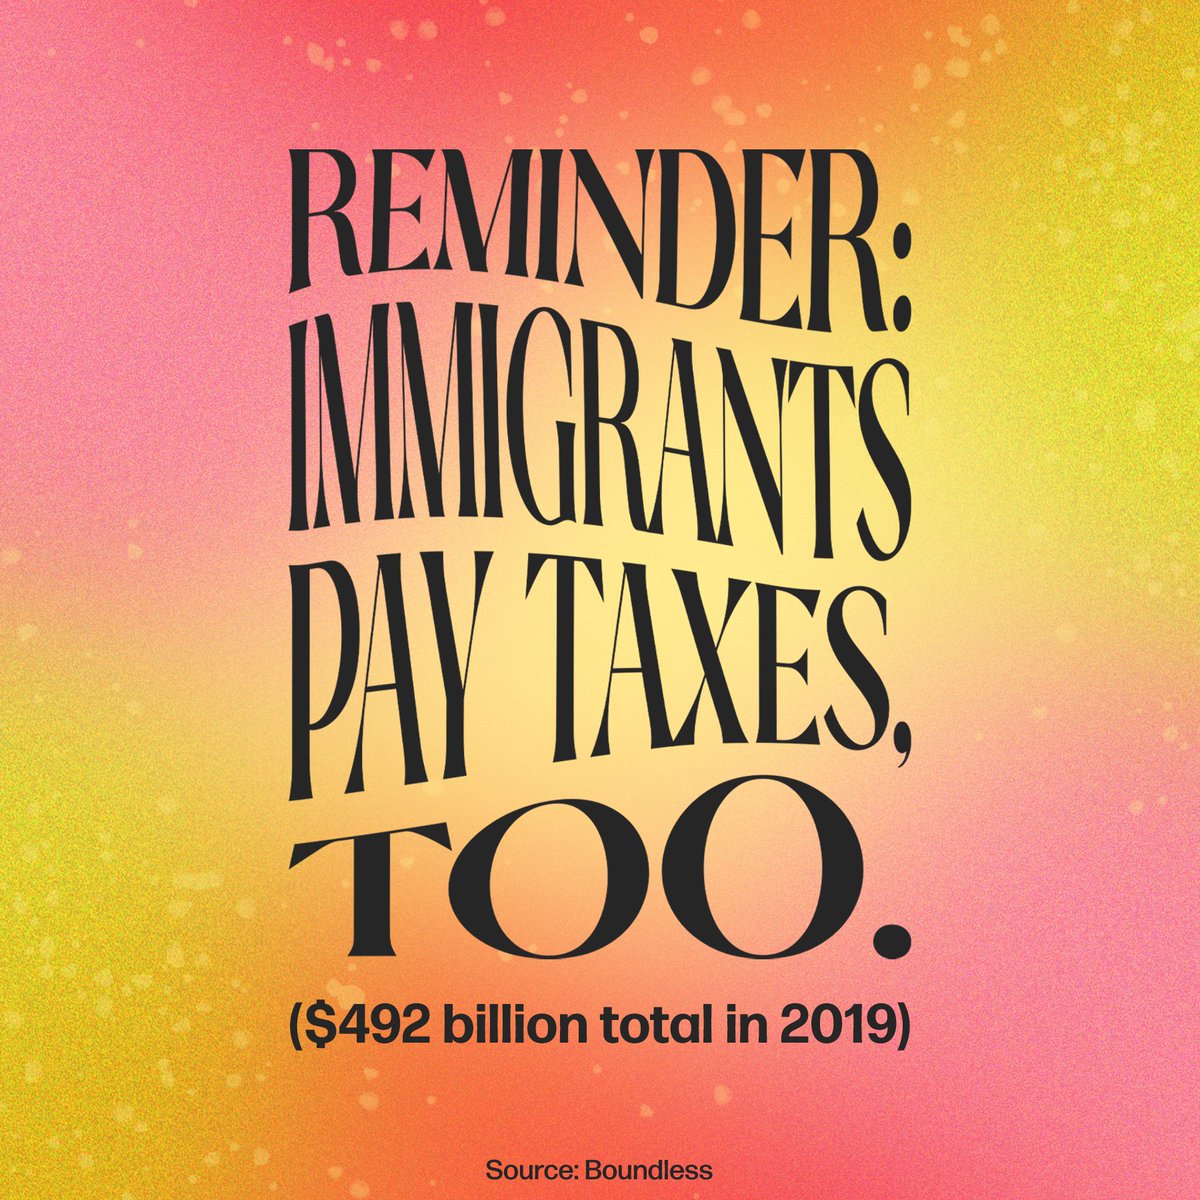 Reminder: undocumented immigrants contribute billions in taxes annually, supporting vital programs like Medicare and Social Security. Despite their contributions, they are denied access to services they help fund. We all must have access to the resources we need to thrive.